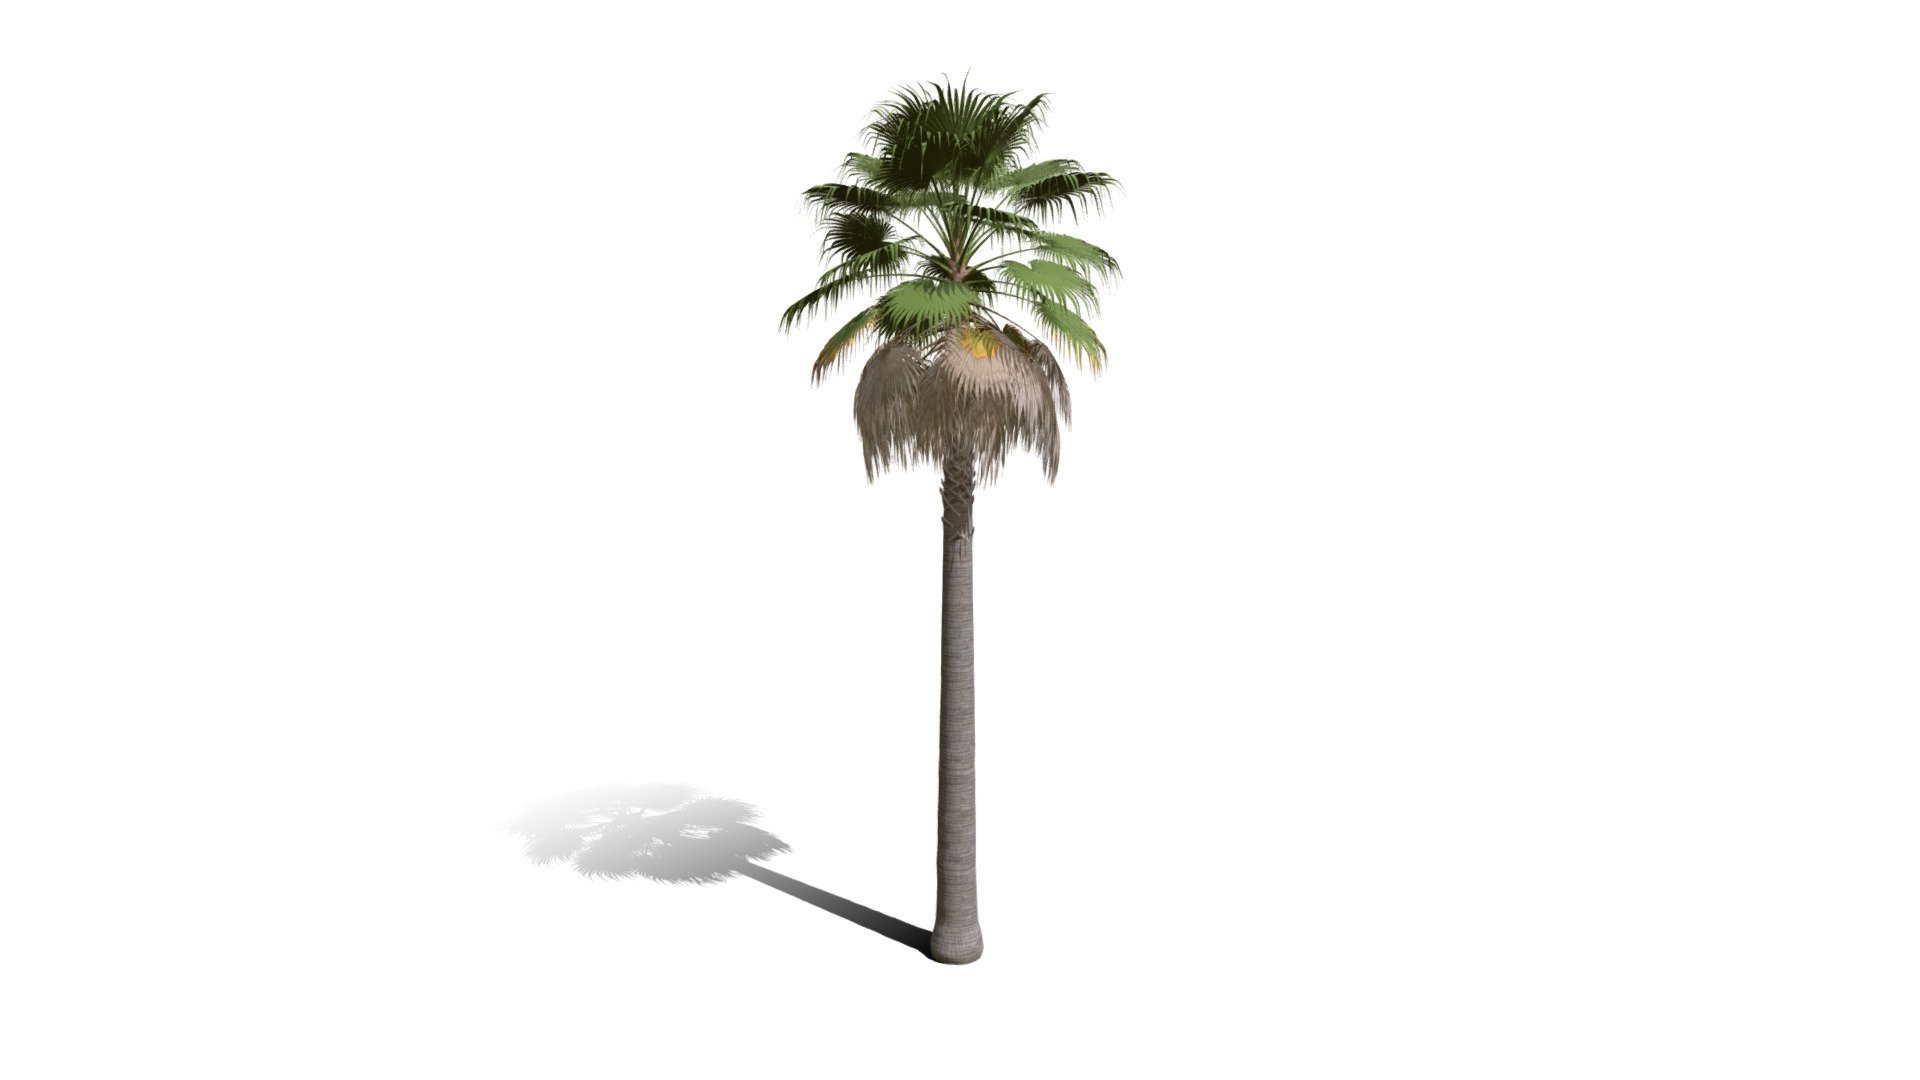 Model specs:





Species Latin name: Washingtonia filifera




Species Common name: California fan palm




Preset name: Urban 1 mat 100




Maturity stage: Old




Health stage: Thriving




Season stage: Spring




Leaves count: 5408




Height: 14.8 meters




LODs included: Yes




Mesh type: static




Vertex colors: (R) Material blending, (A) Ambient occlusion



Better used for Hi Poly workflows!

Species description:





Origin: North America




Biomes: Desert,Scrubland




Climatic Zones: Mediterranean,Subtropical,Tropical




Plant type: Palm



This PlantCatalog mesh was exported at 40% of its maximum mesh resolution. With the full PlantCatalog, customize hundreds of procedural models + apply wind animations + convert to native shaders and a lot more: https://info.e-onsoftware.com/plantcatalog/ - Realistic HD California fan palm (15/25) - Buy Royalty Free 3D model by PlantCatalog 3d model